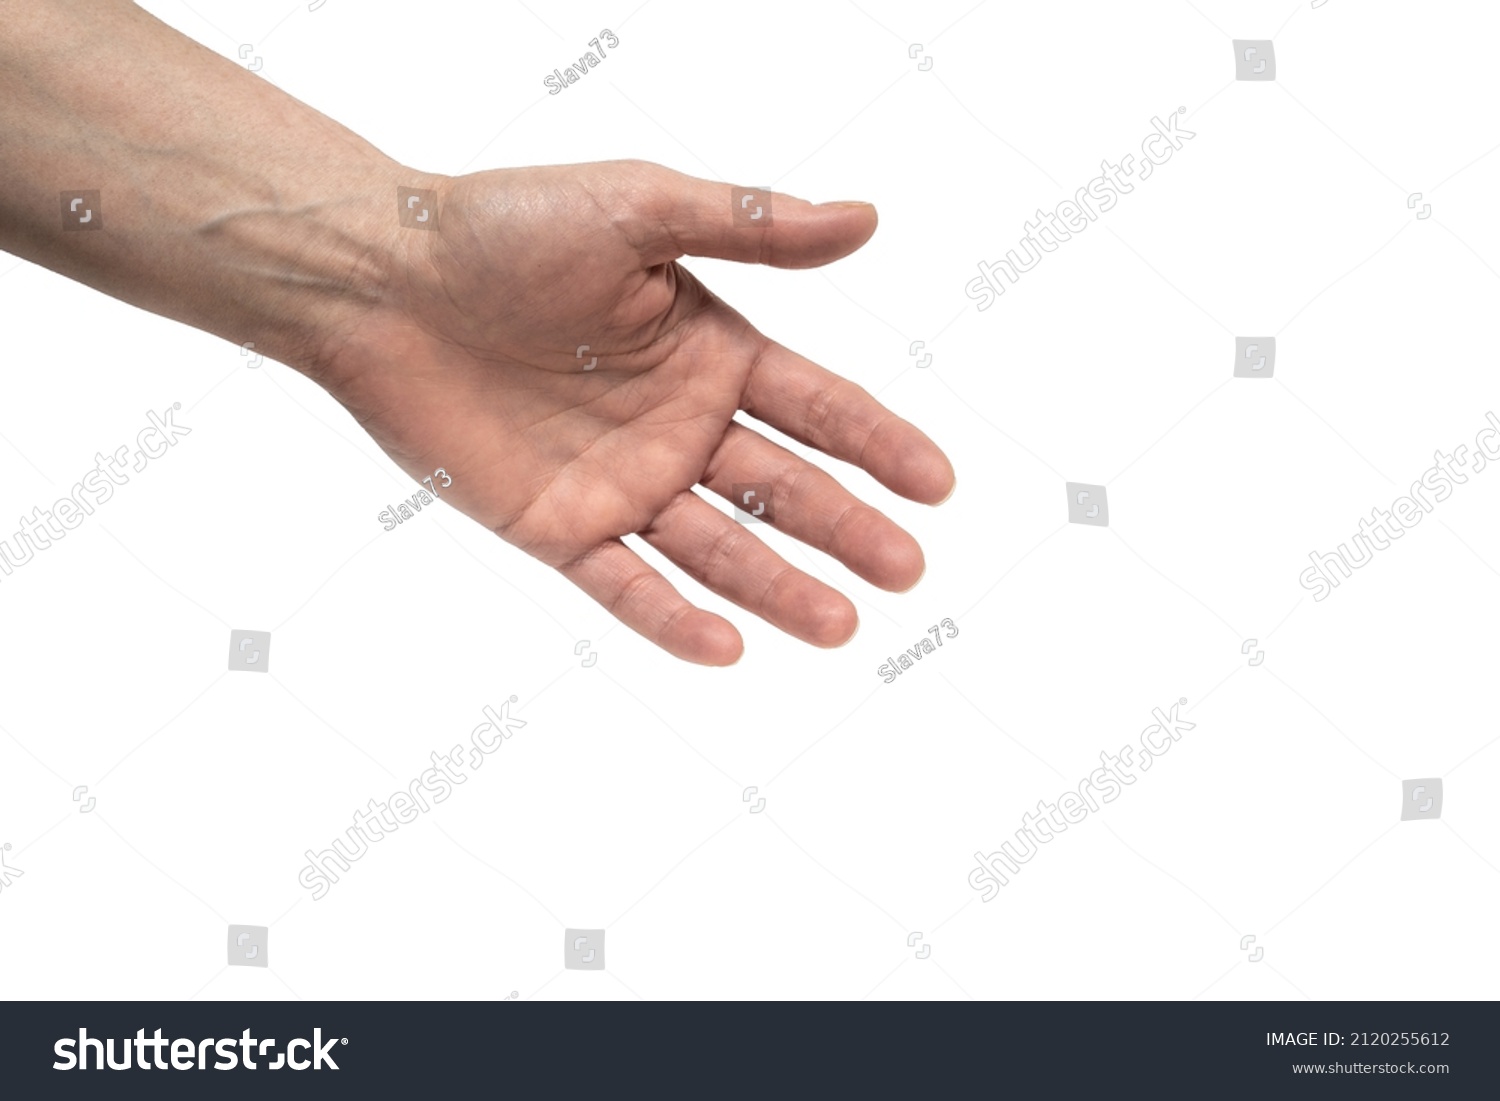 Female hand 46 years old with an open palm spread fingers close-up mockup isolate on a white background, #2120255612